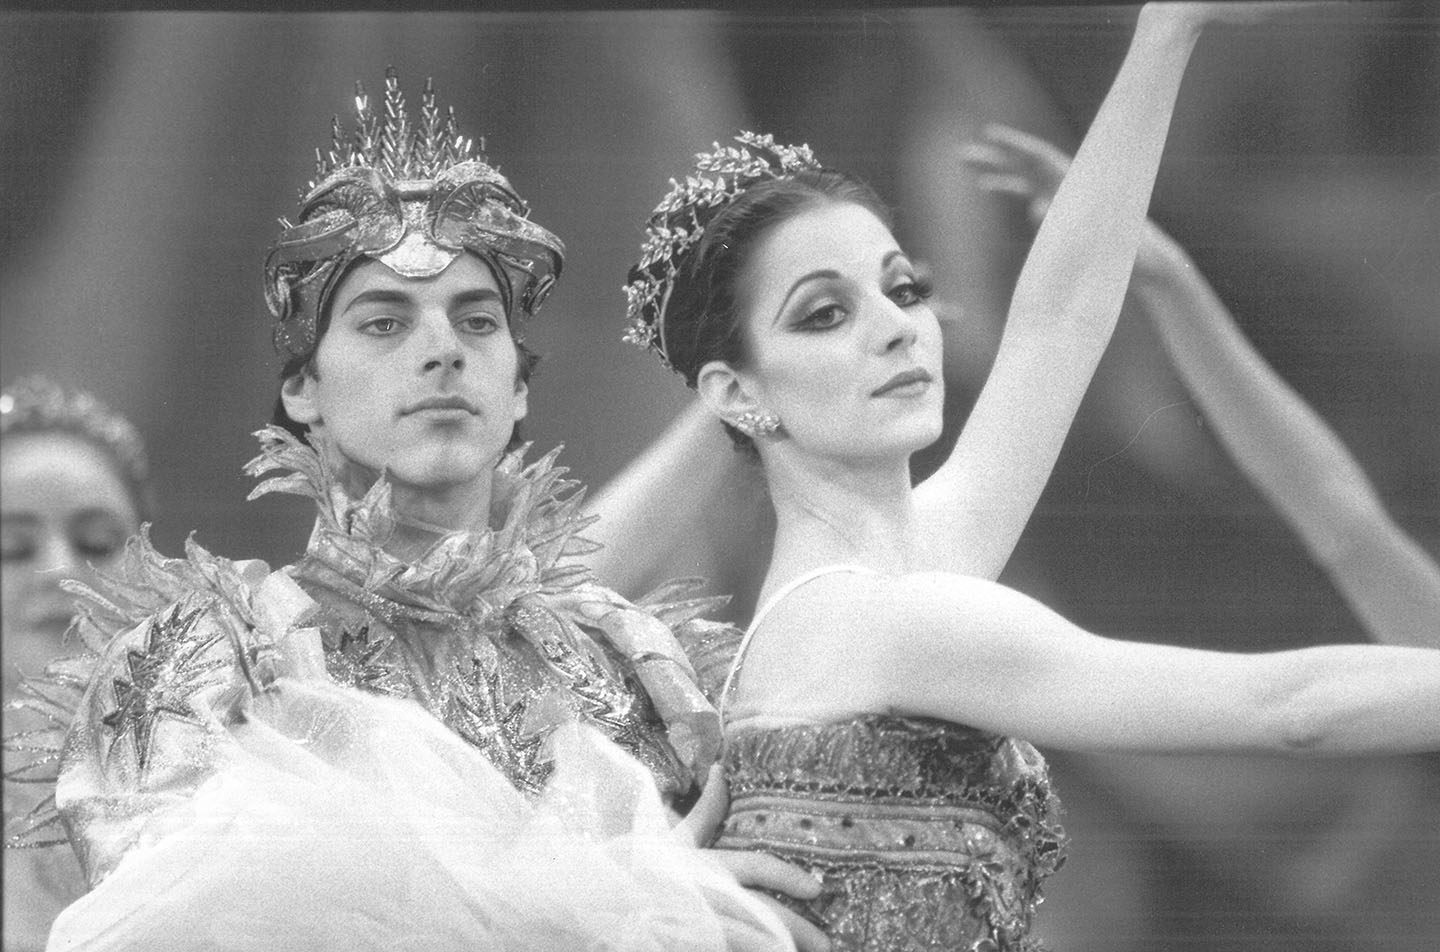 Leslie Browne and Ethan Brown in The Sleeping Beauty.